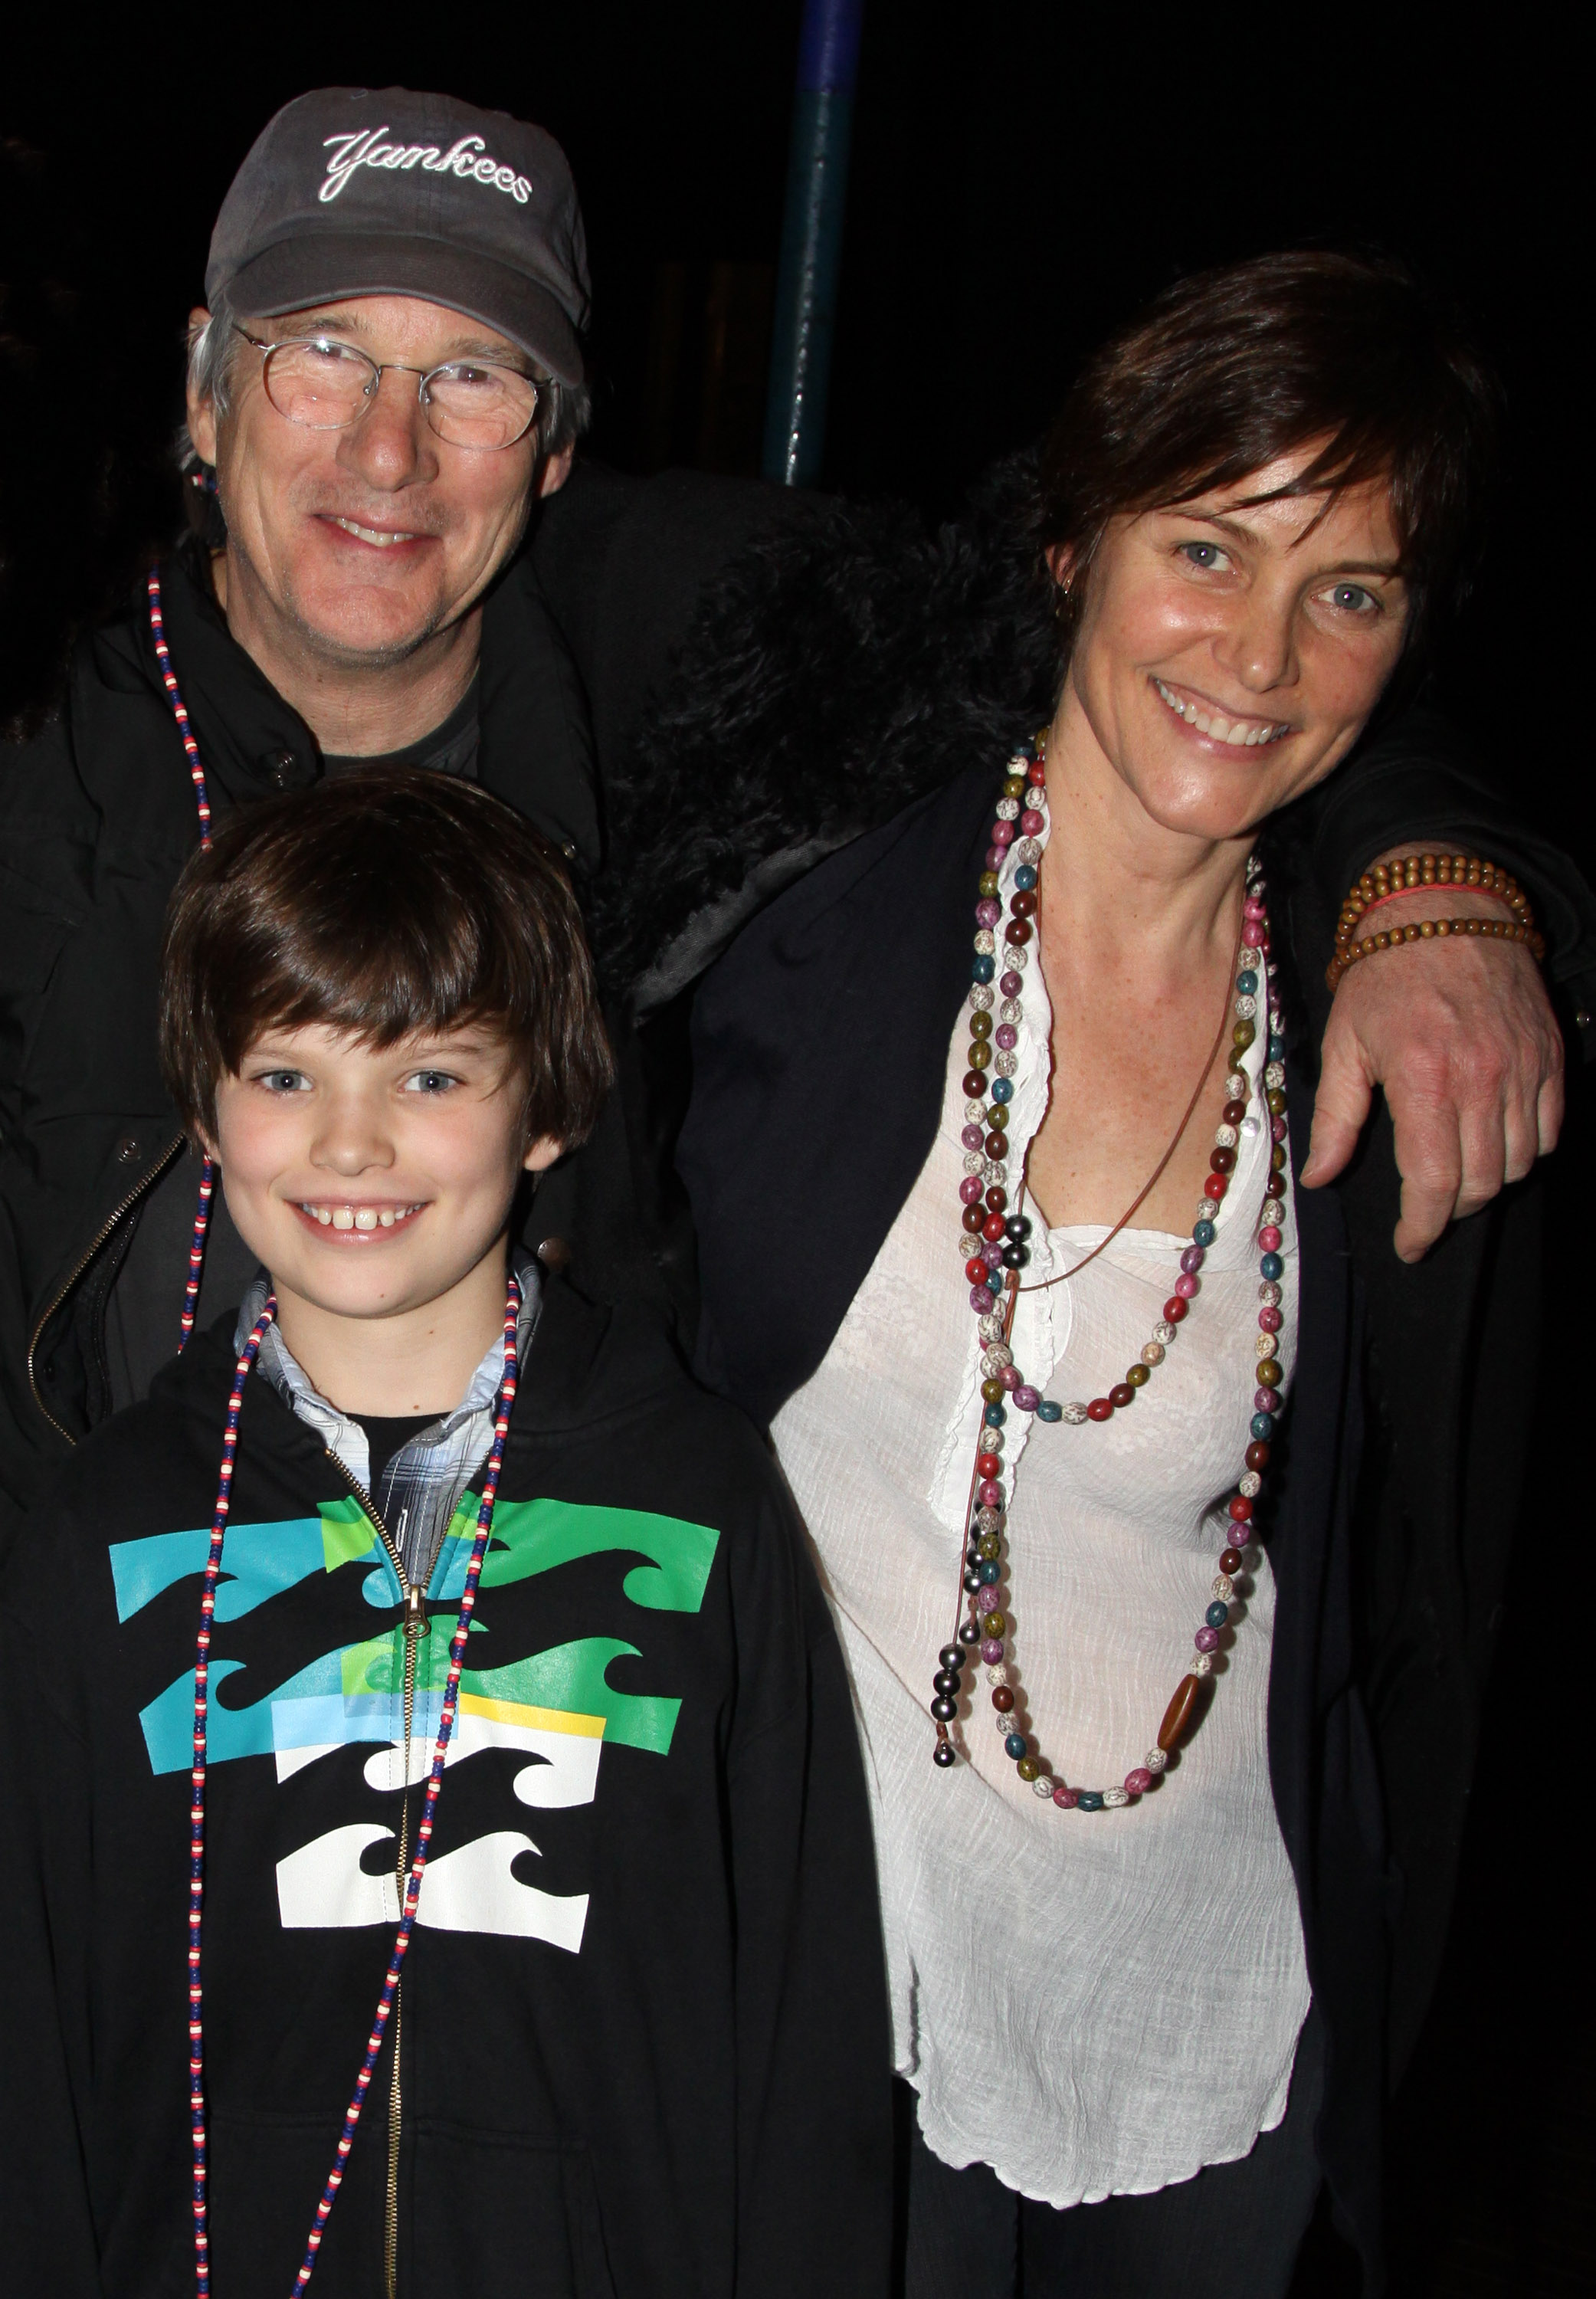 Richard Gere, Homer James Jigme Gere and Carey Lowell backstage at the "Hair" Broadway musical in New York City on March 14, 2010 | Source: Getty Images